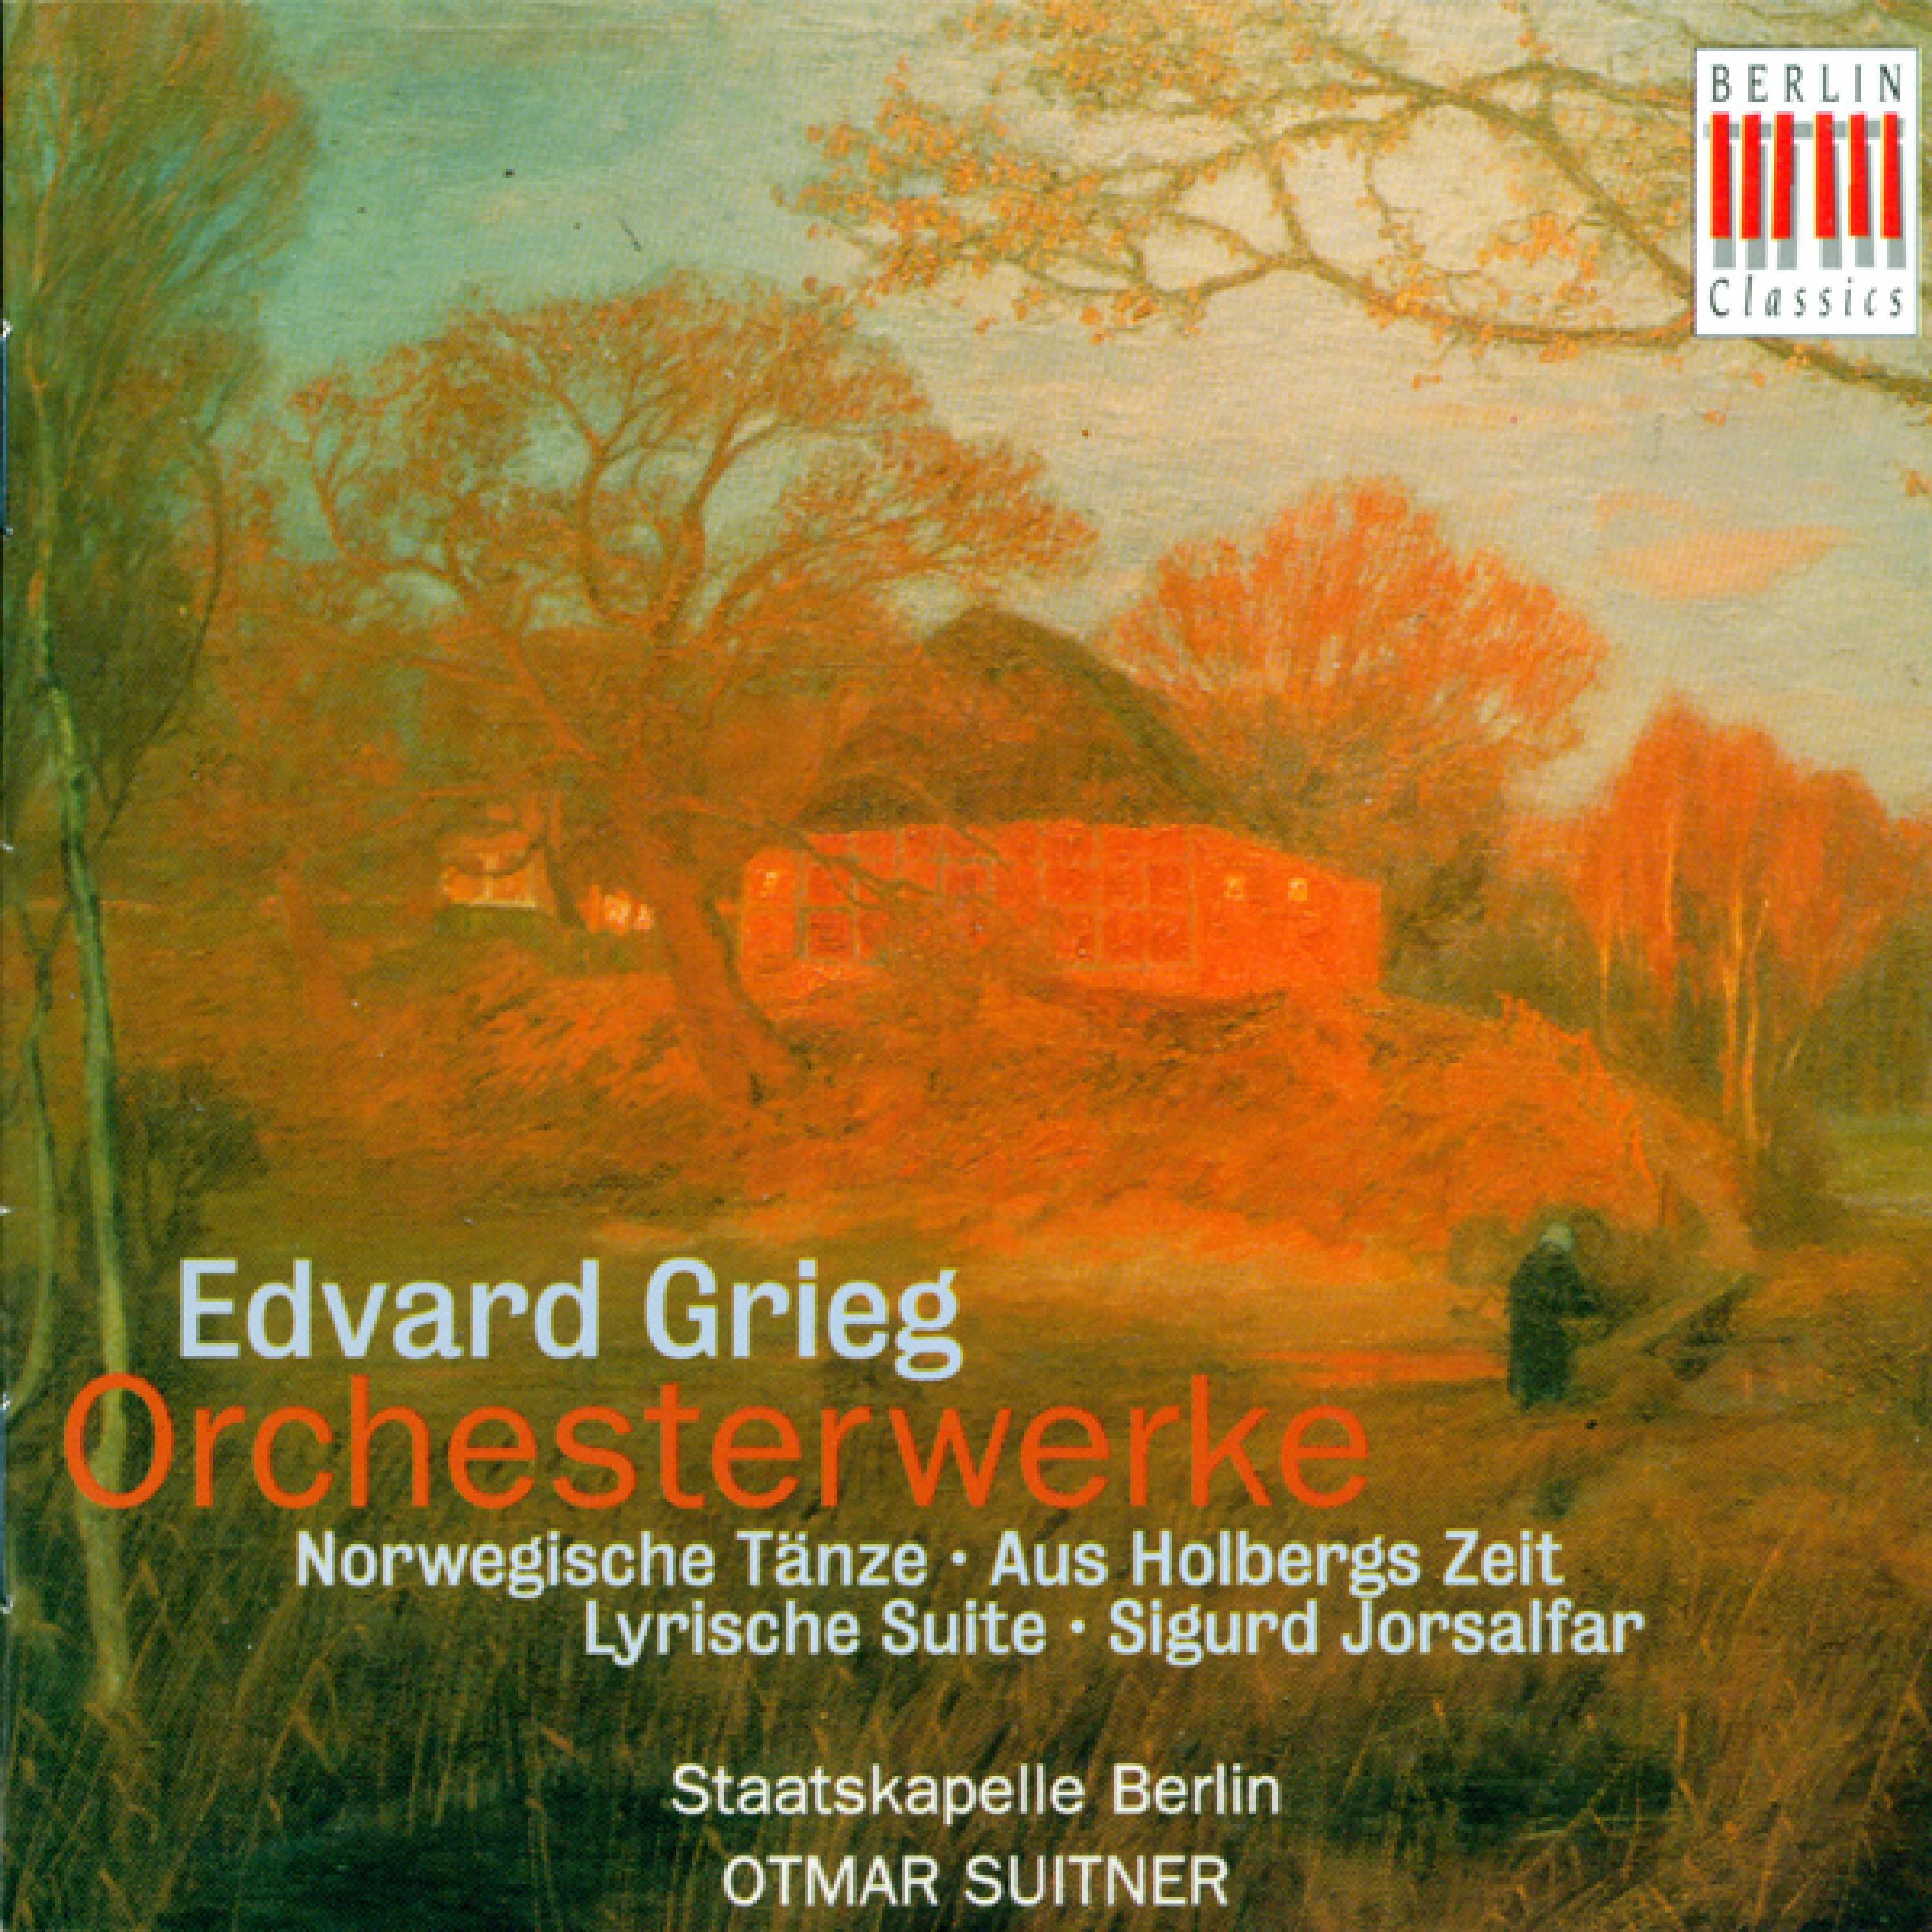 Three Orchestral Pieces from Sigurd Jorsalfar, Op. 56: No. 1, Prelude - In the King's Hall